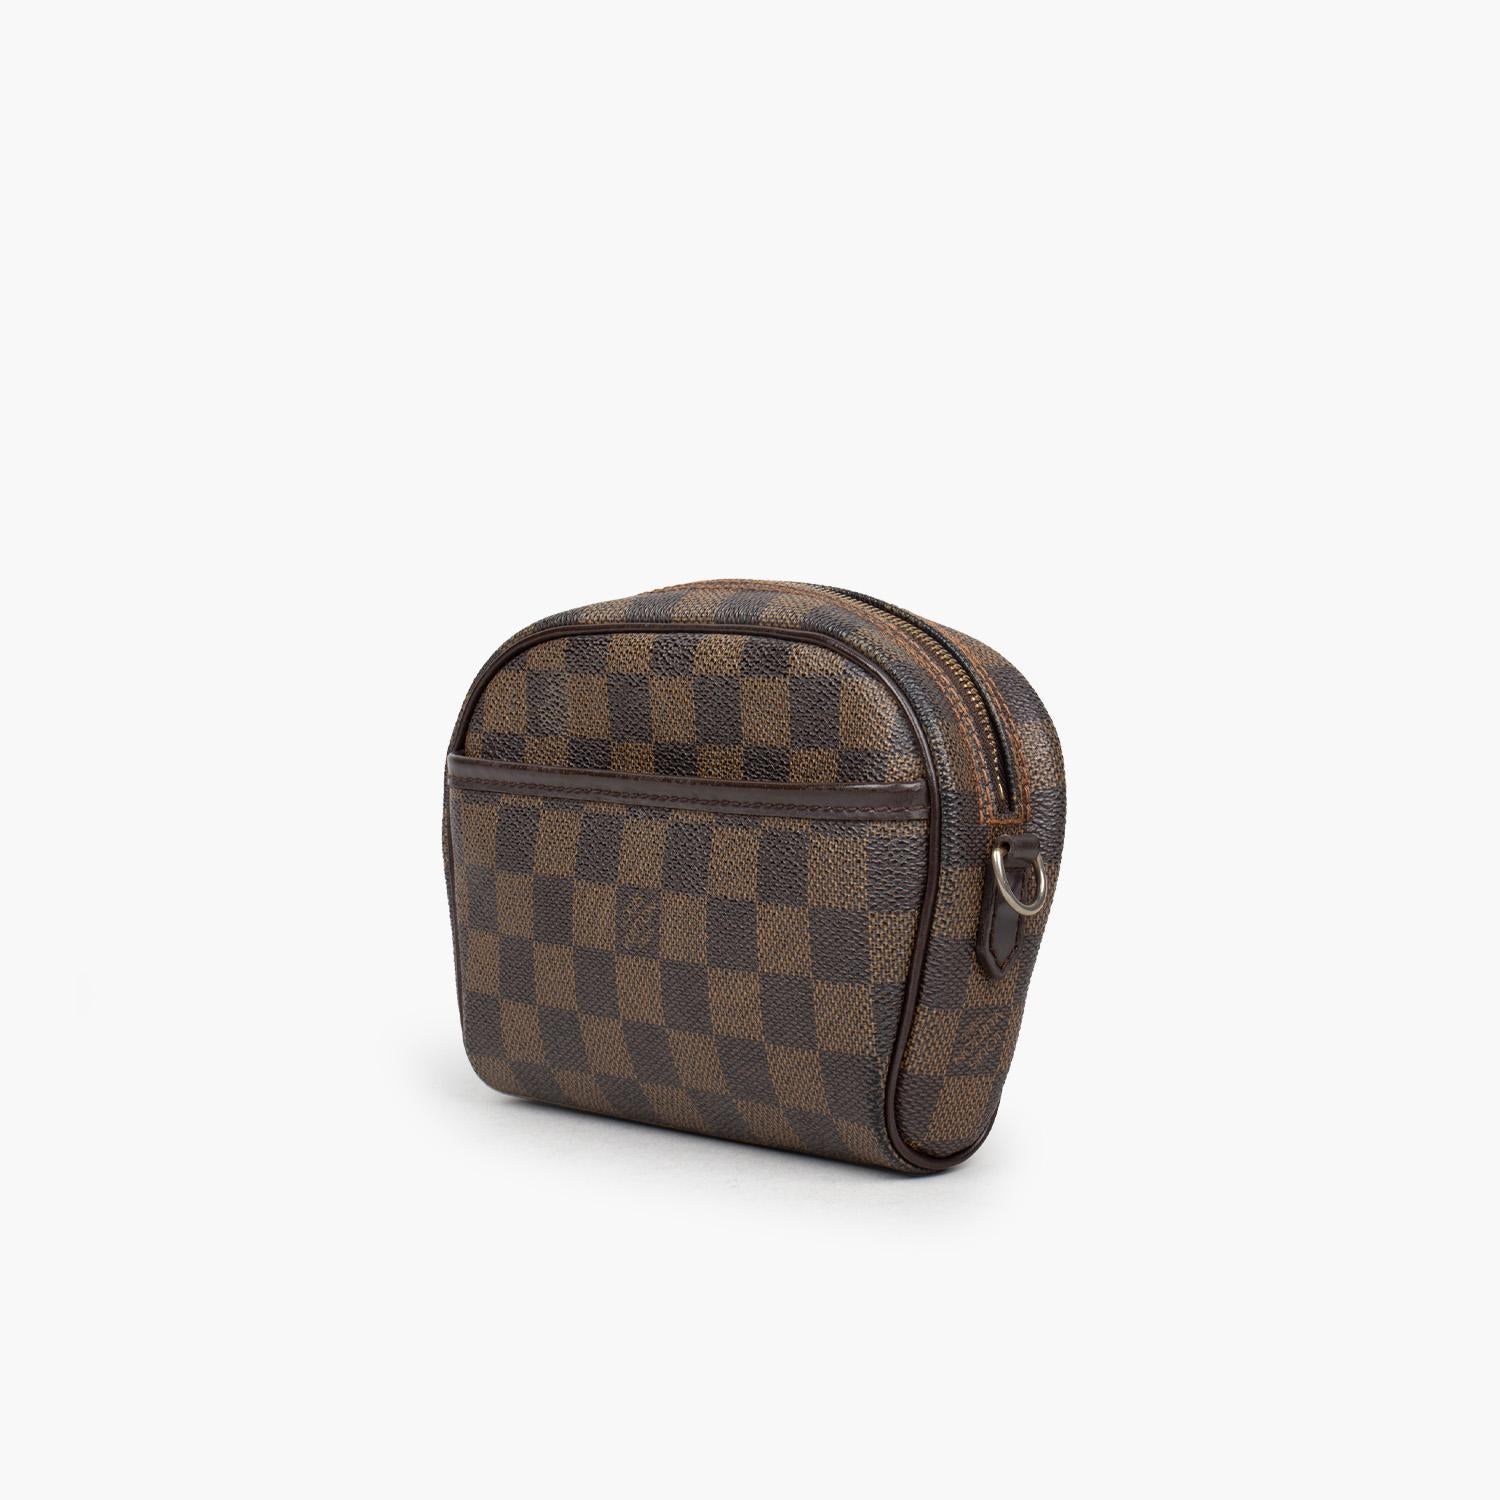 Louis Vuitton Damier Ebene Pochette Ipanema

– Brass hardware
– Brown coated canvas
– Tonal leather trim
– Single adjustable shoulder strap, single exterior pocket, alcantara lining with zip Closure at Top

Overall Preloved Condition: Very